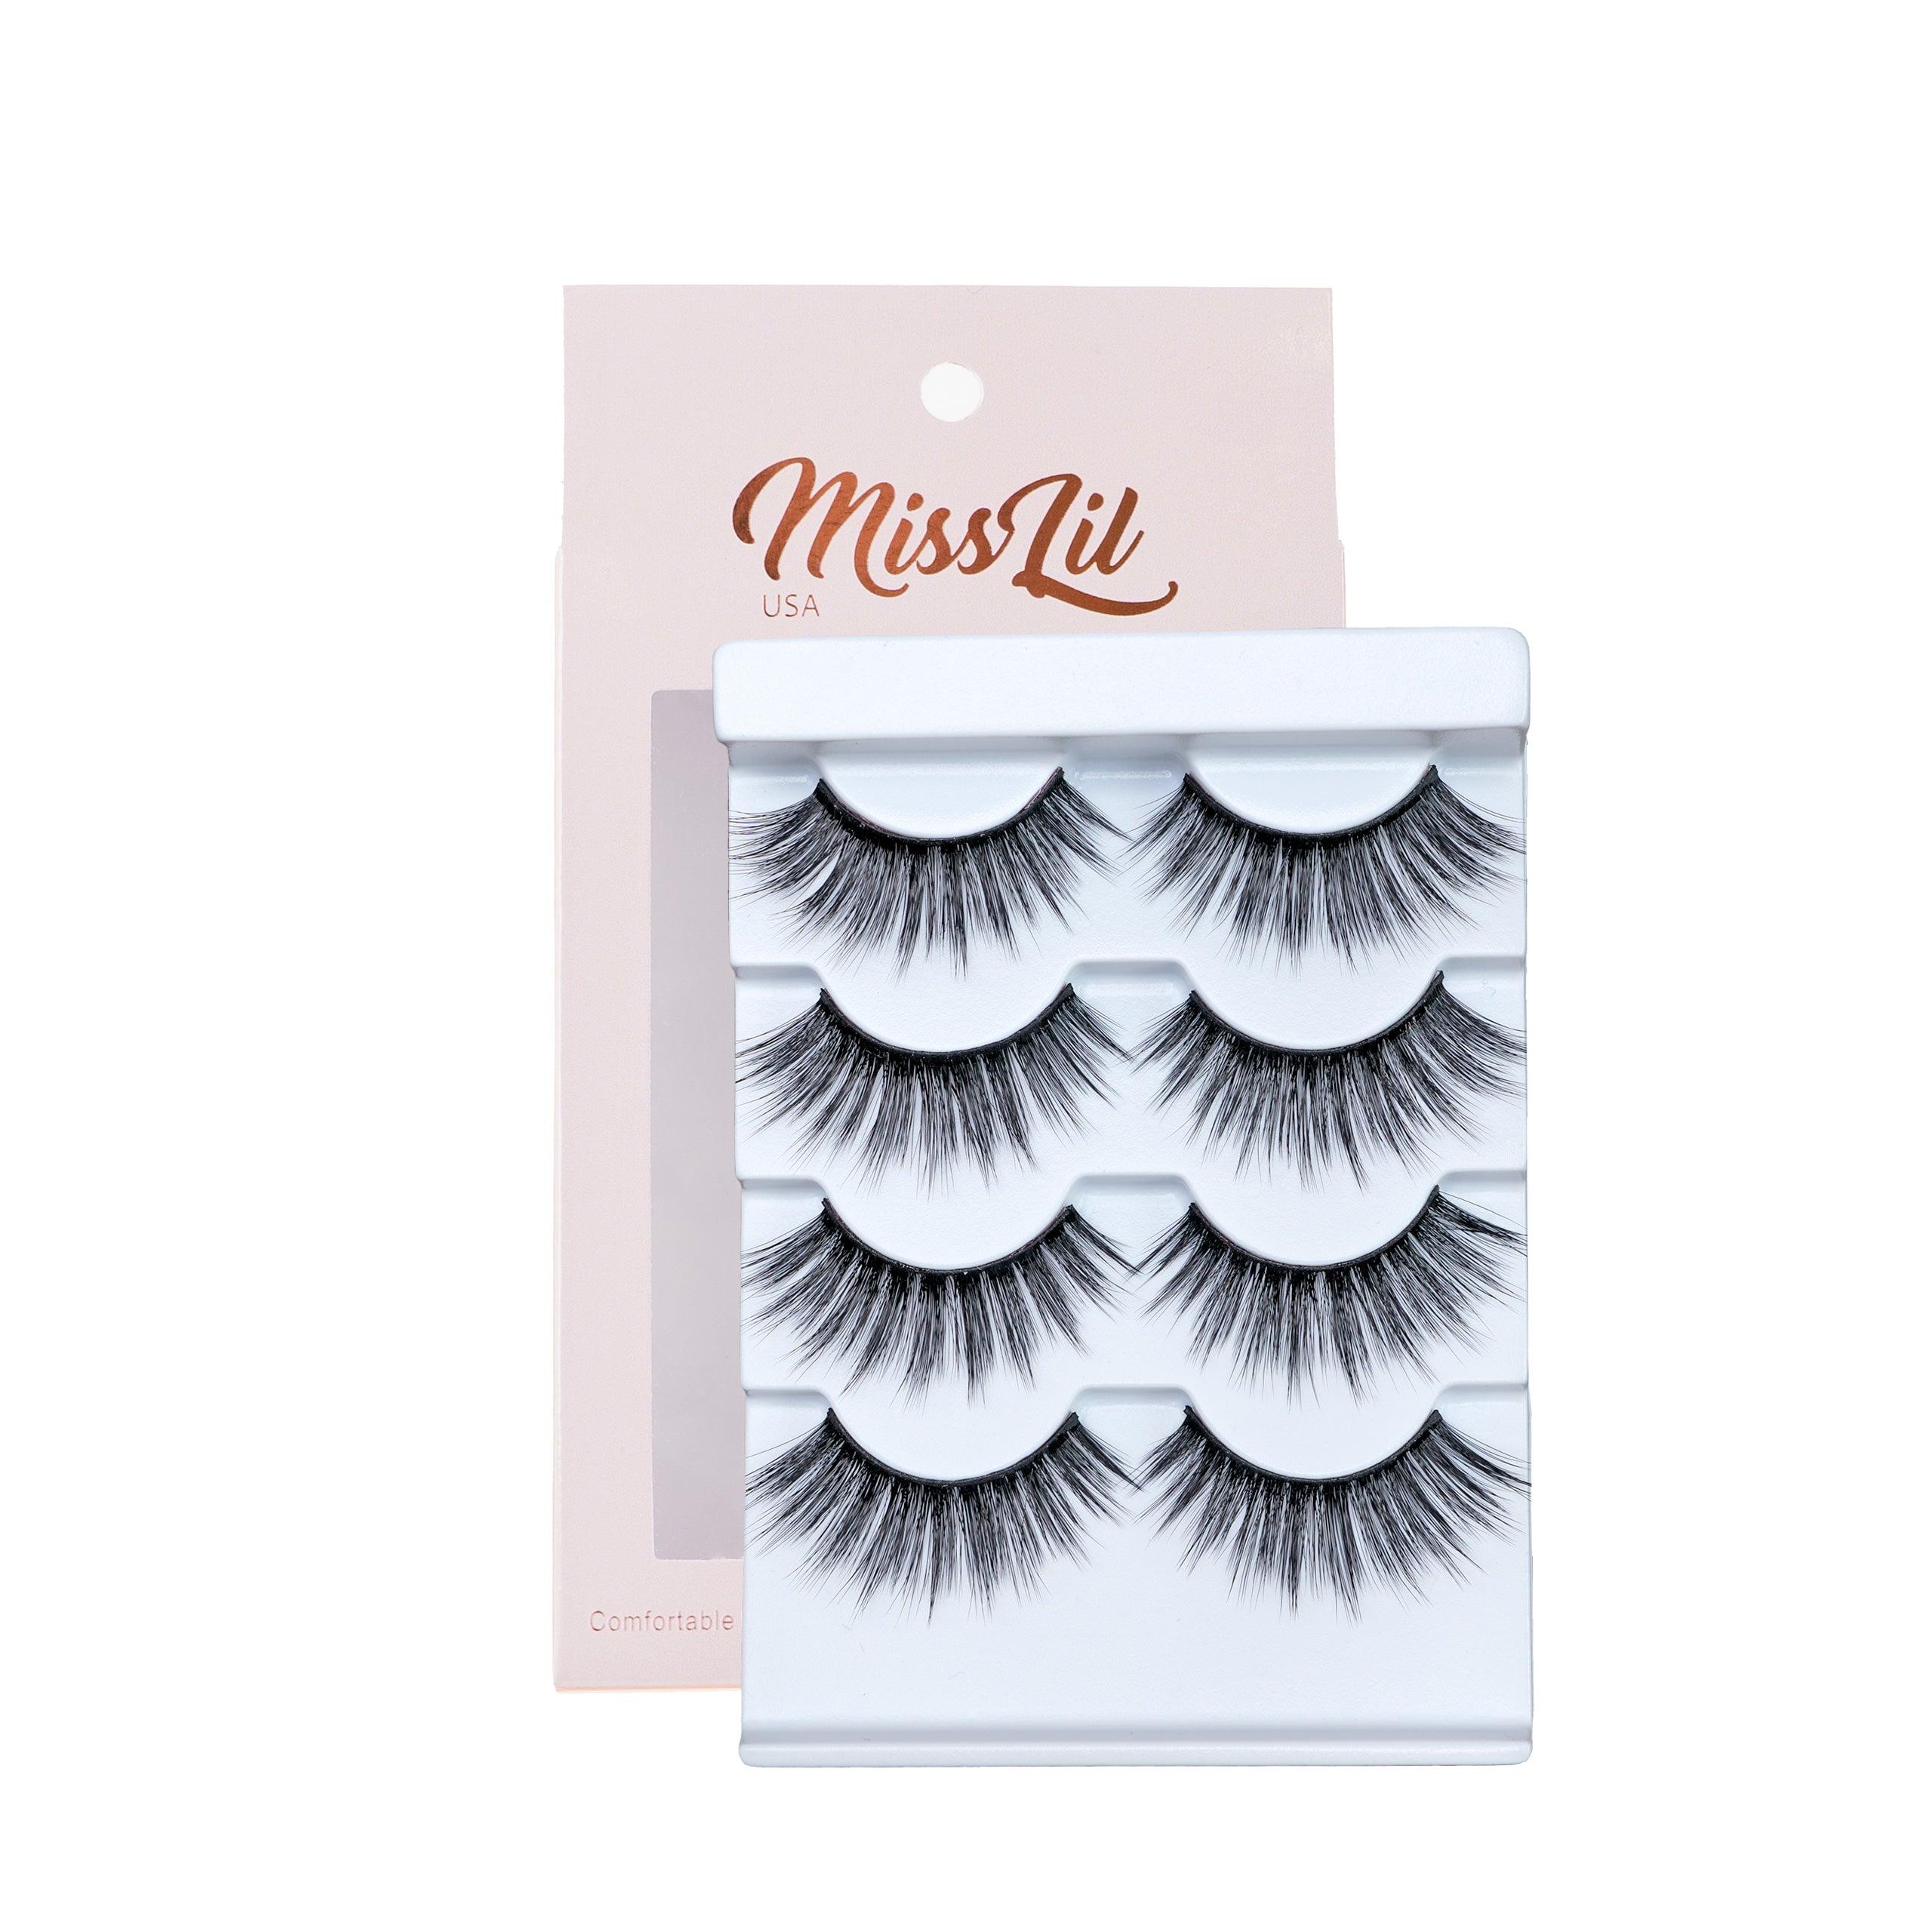 4 Pairs Lashes - Classic Collection #1 (Pack of 12) - Miss Lil USA